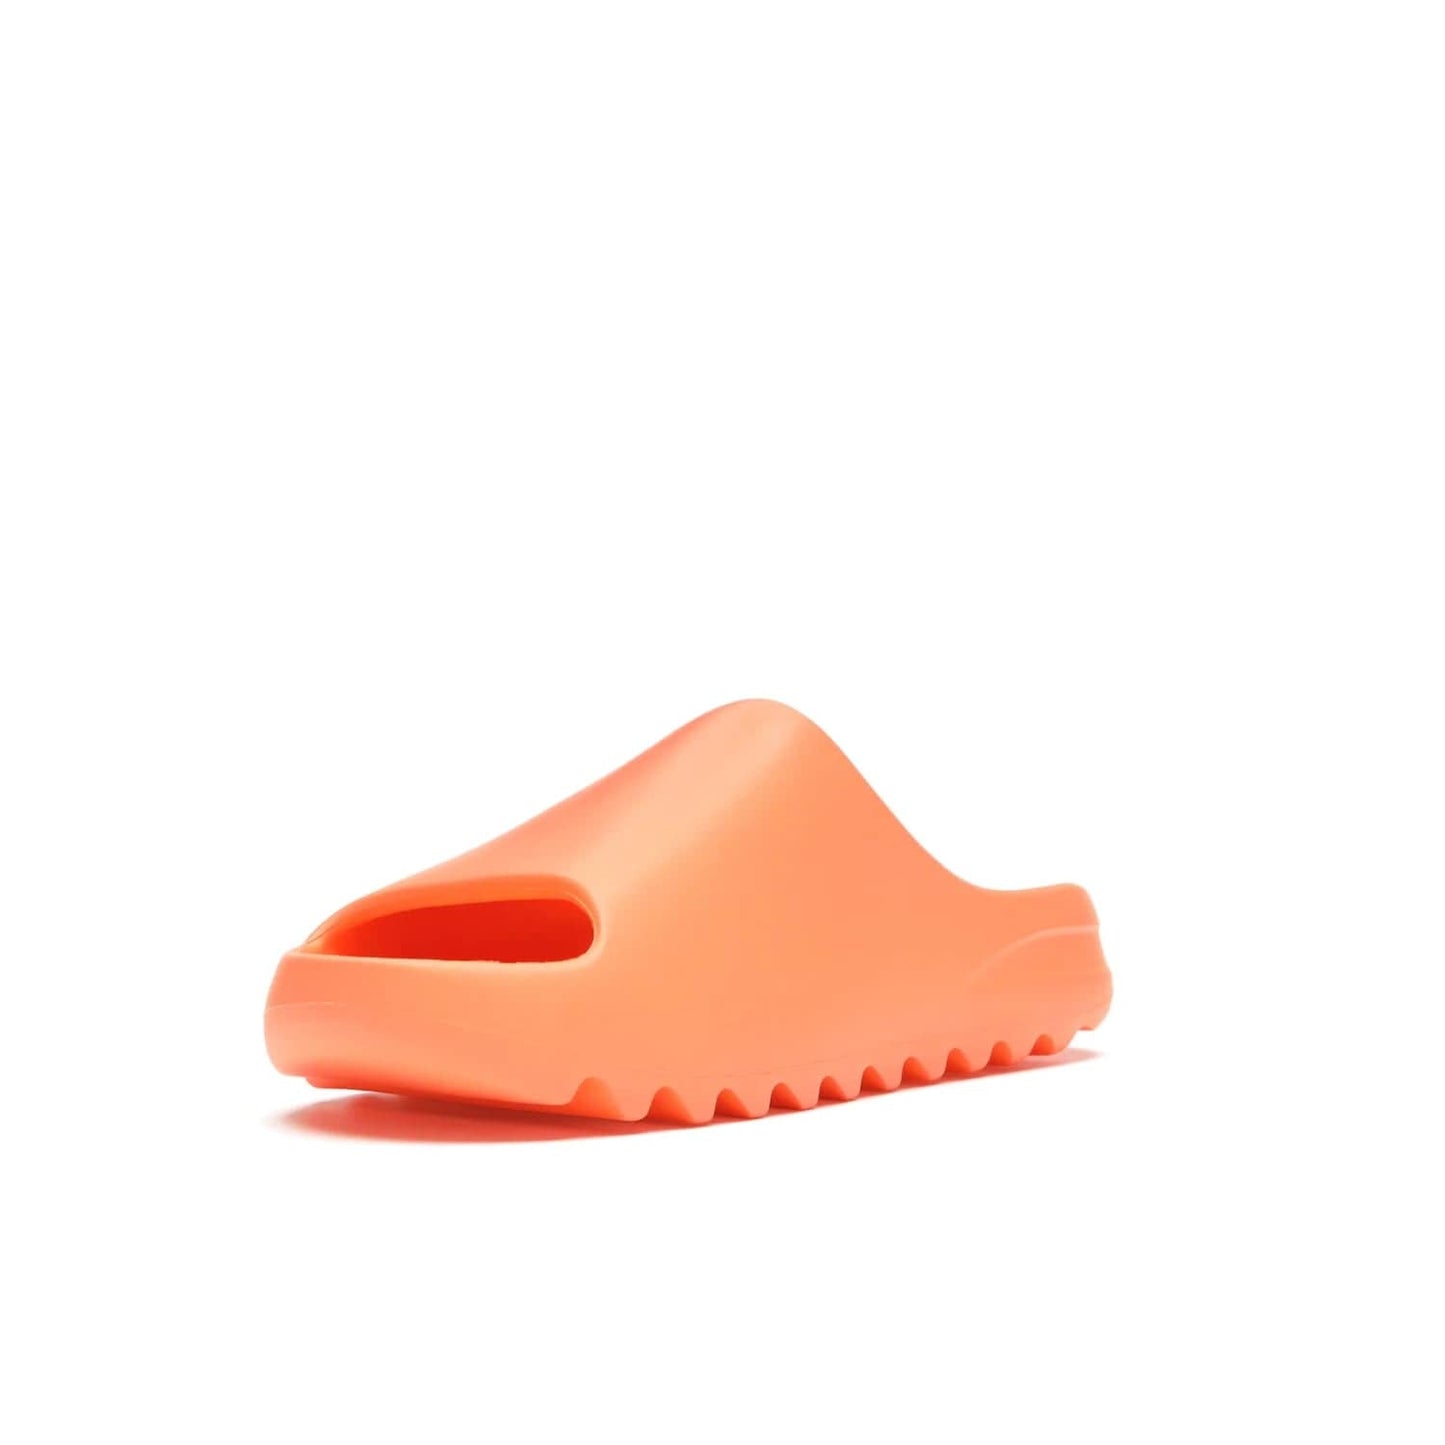 adidas Yeezy Slide Enflame Orange - Image 14 - Only at www.BallersClubKickz.com - Limited edition adidas Yeezy Slide featuring a bold Enflame Orange upper and EVA foam construction. Grooved outsole for traction and support. Released June 2021. Perfect for summer.